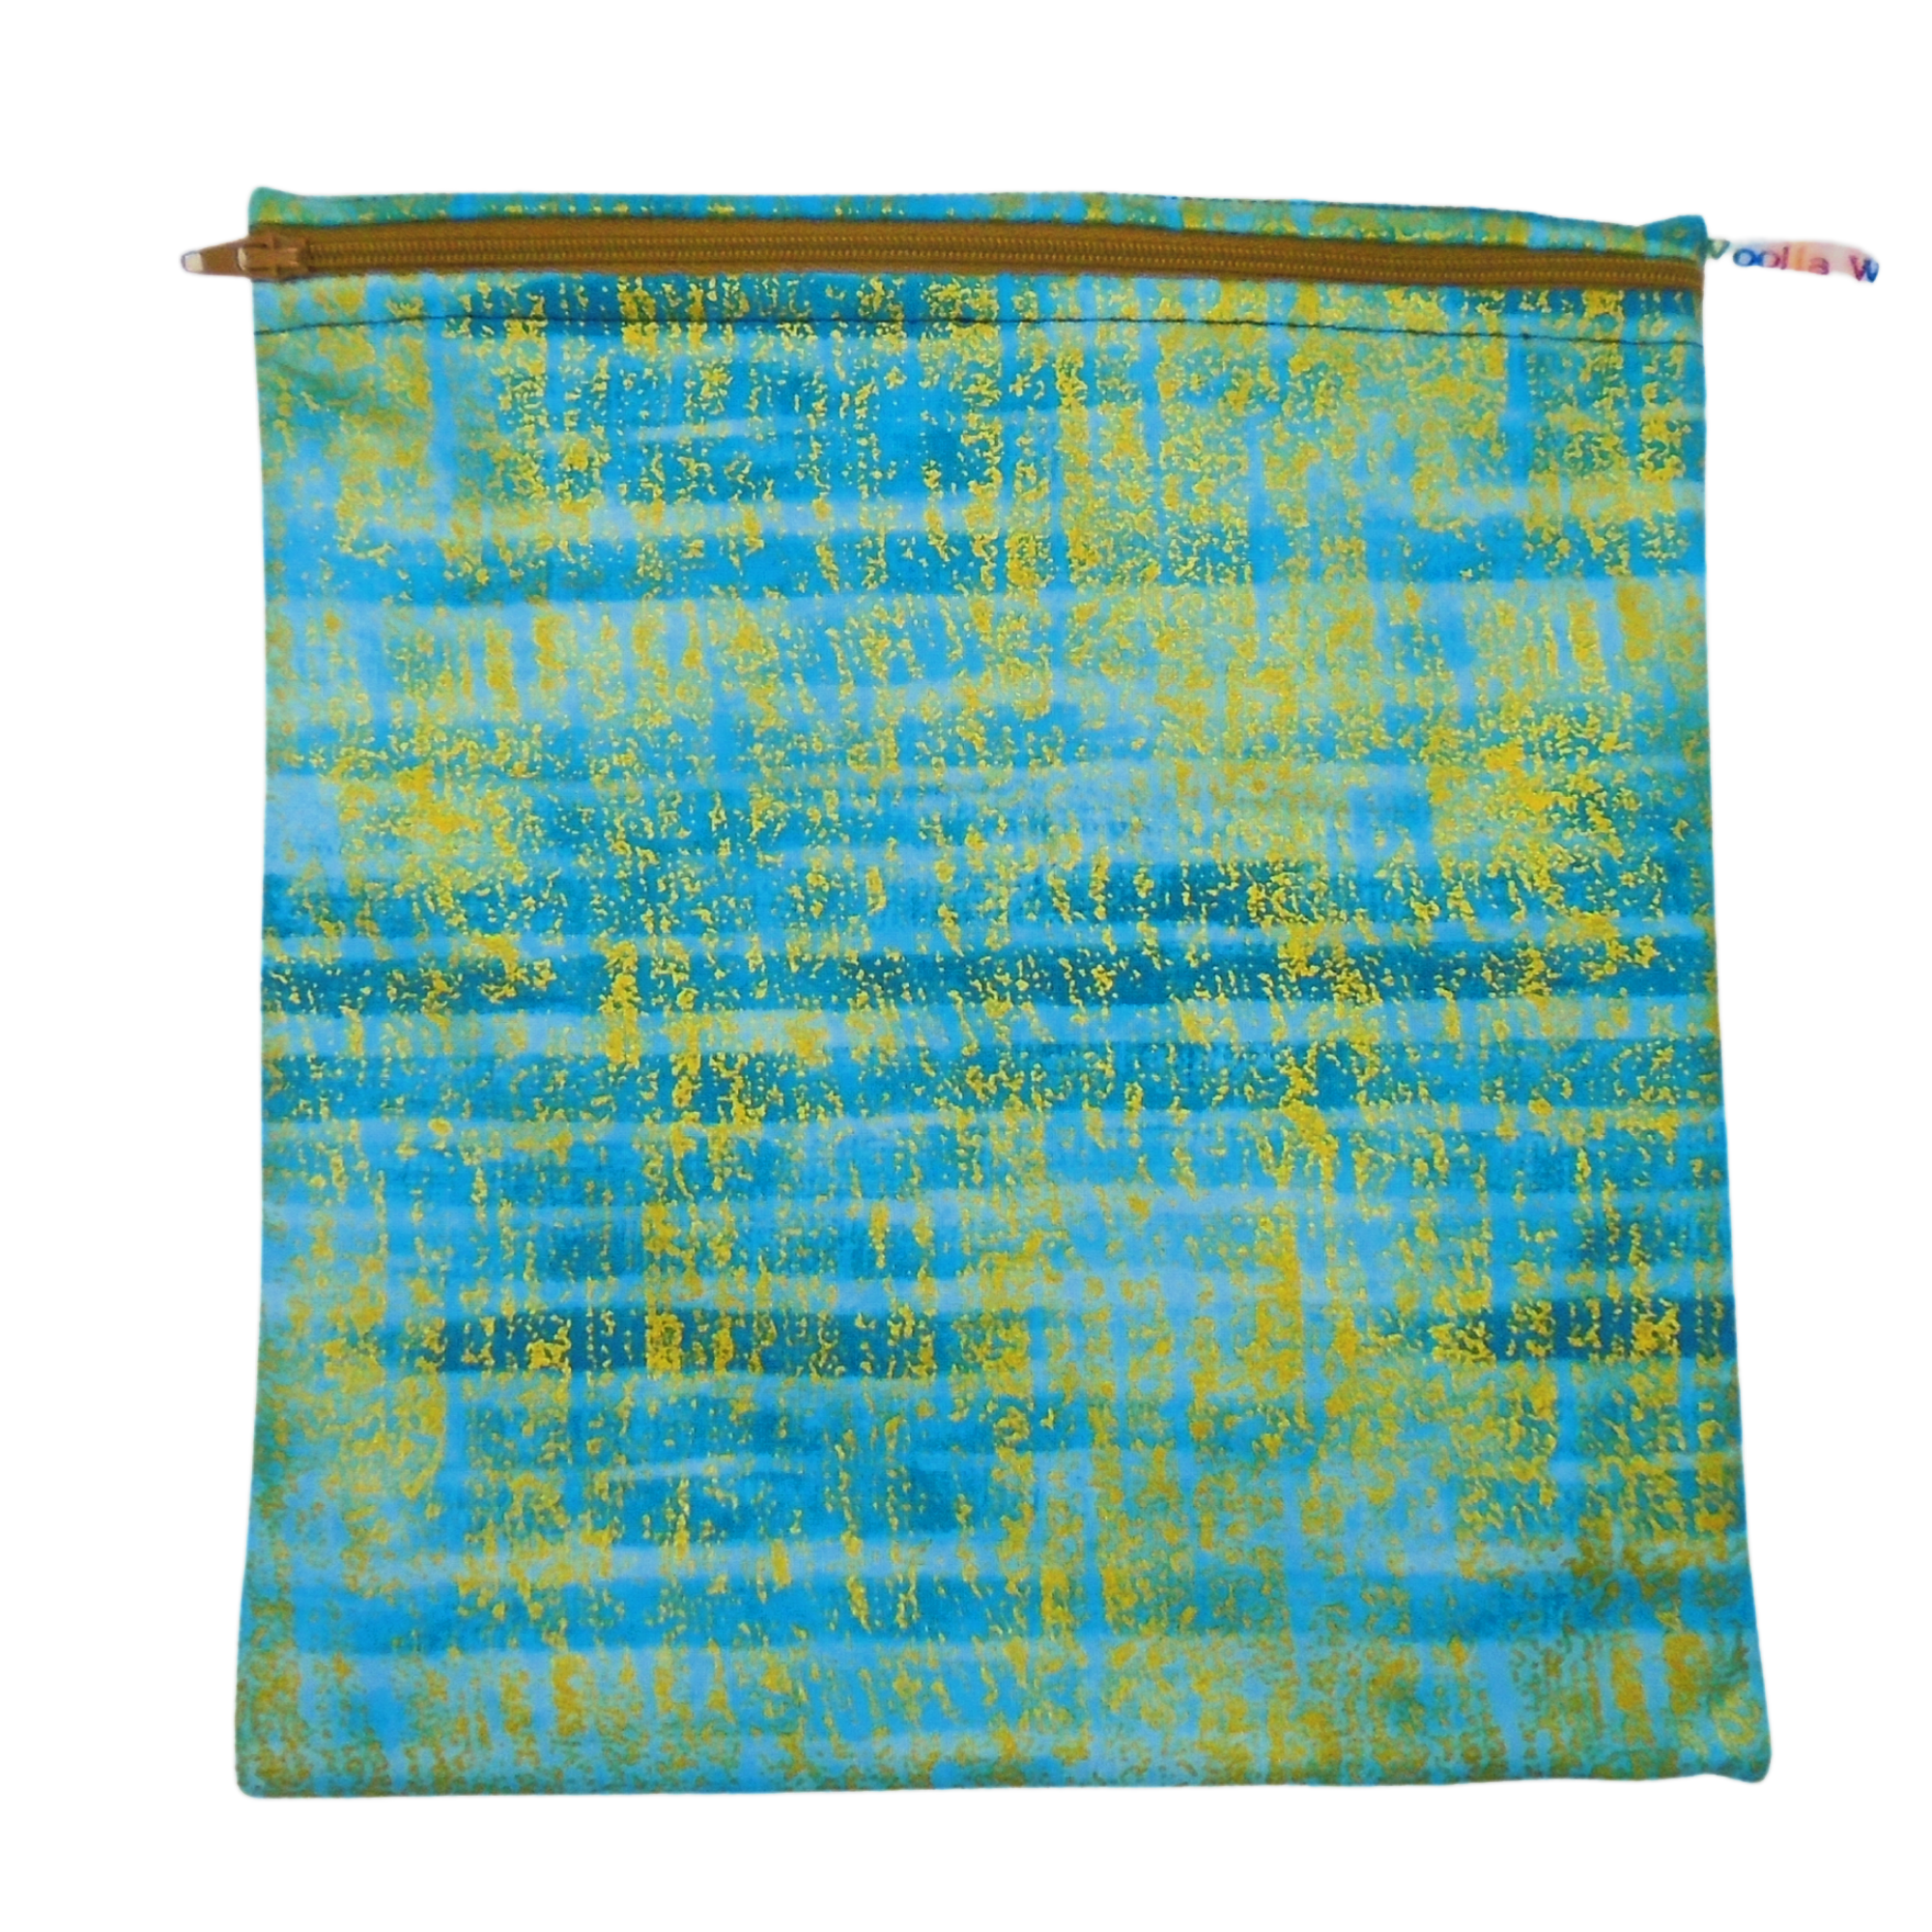 Ocean Gold Stripe - Large Poppins Pouch - Waterproof, Washable, Food Safe, Vegan, Lined Zip Bag